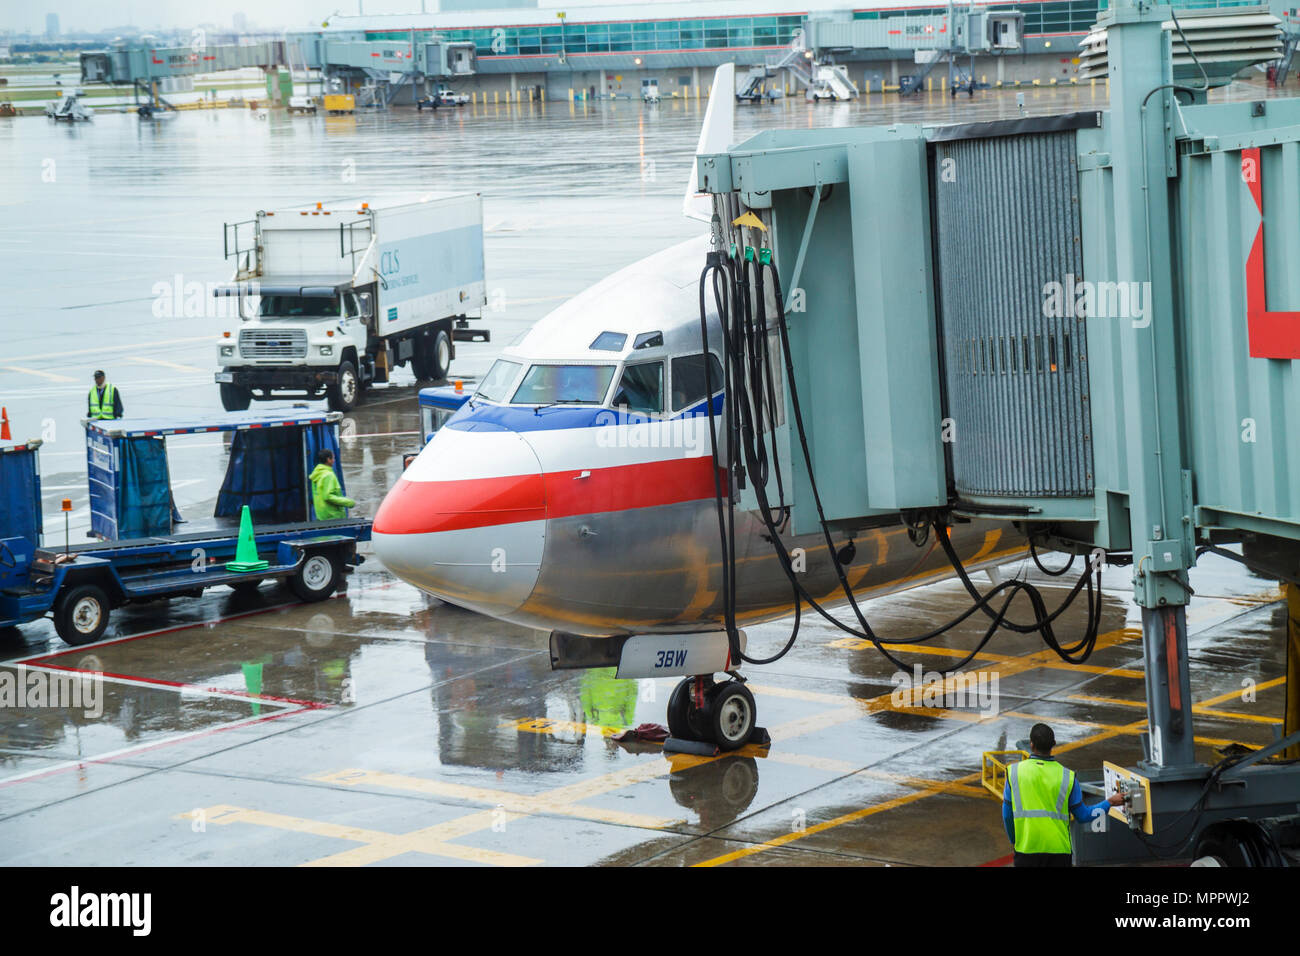 Toronto Canada,Lester B. Pearson International Airport,YYZ,terminal gate,Company,US carrier,American Airlines,Aircraft,tarmac,Ground Crew,window view, Foto Stock